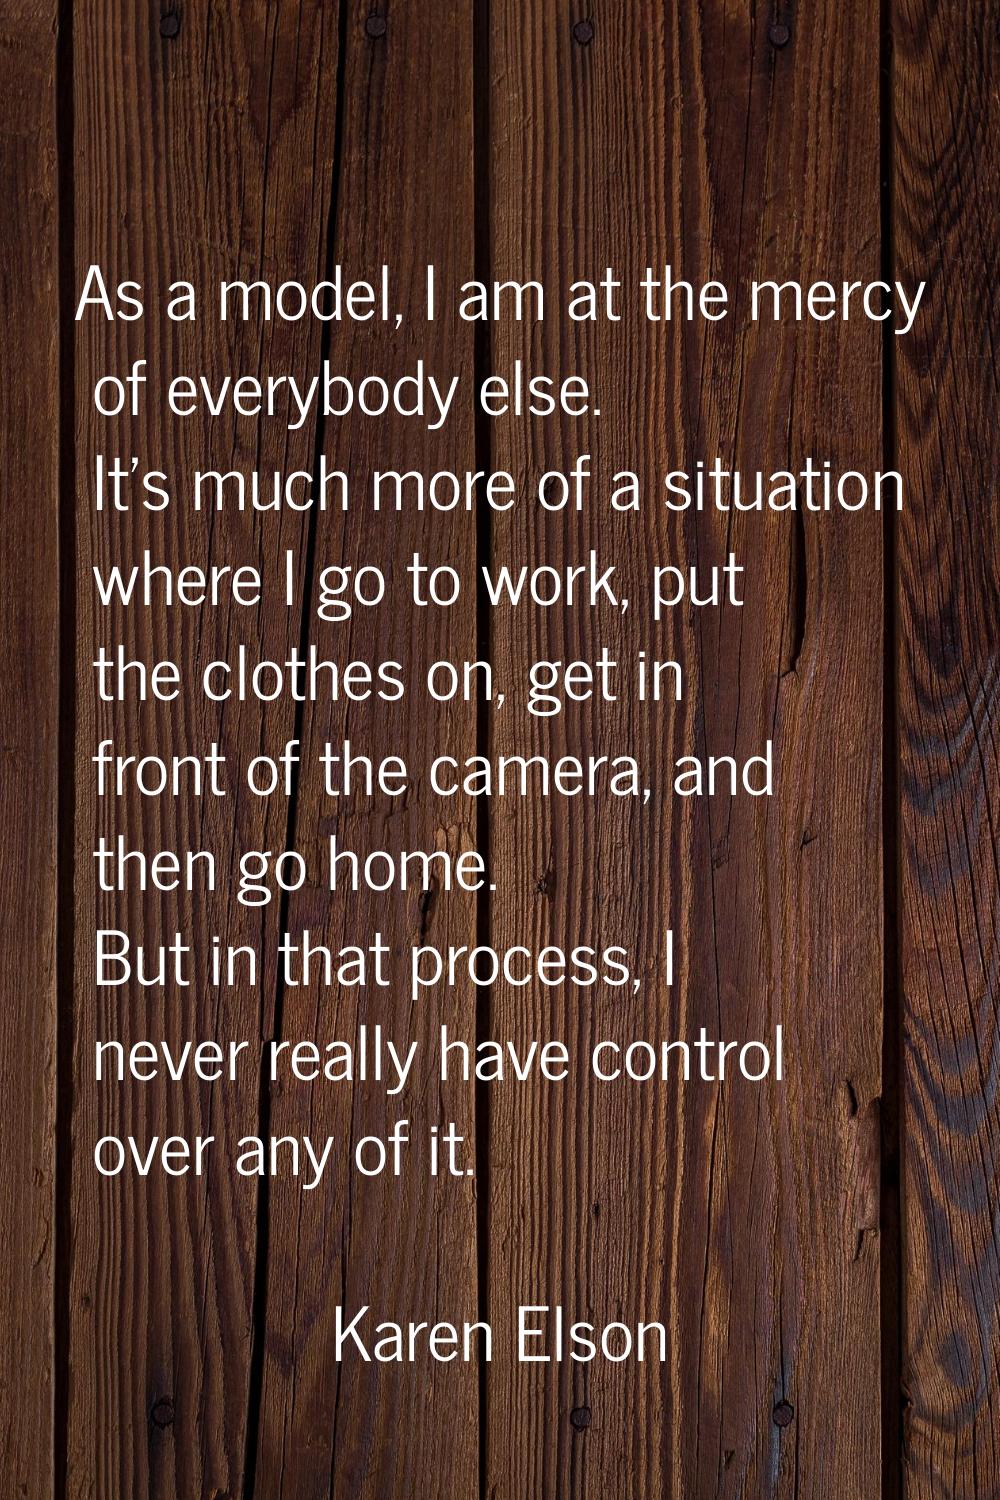 As a model, I am at the mercy of everybody else. It's much more of a situation where I go to work, 